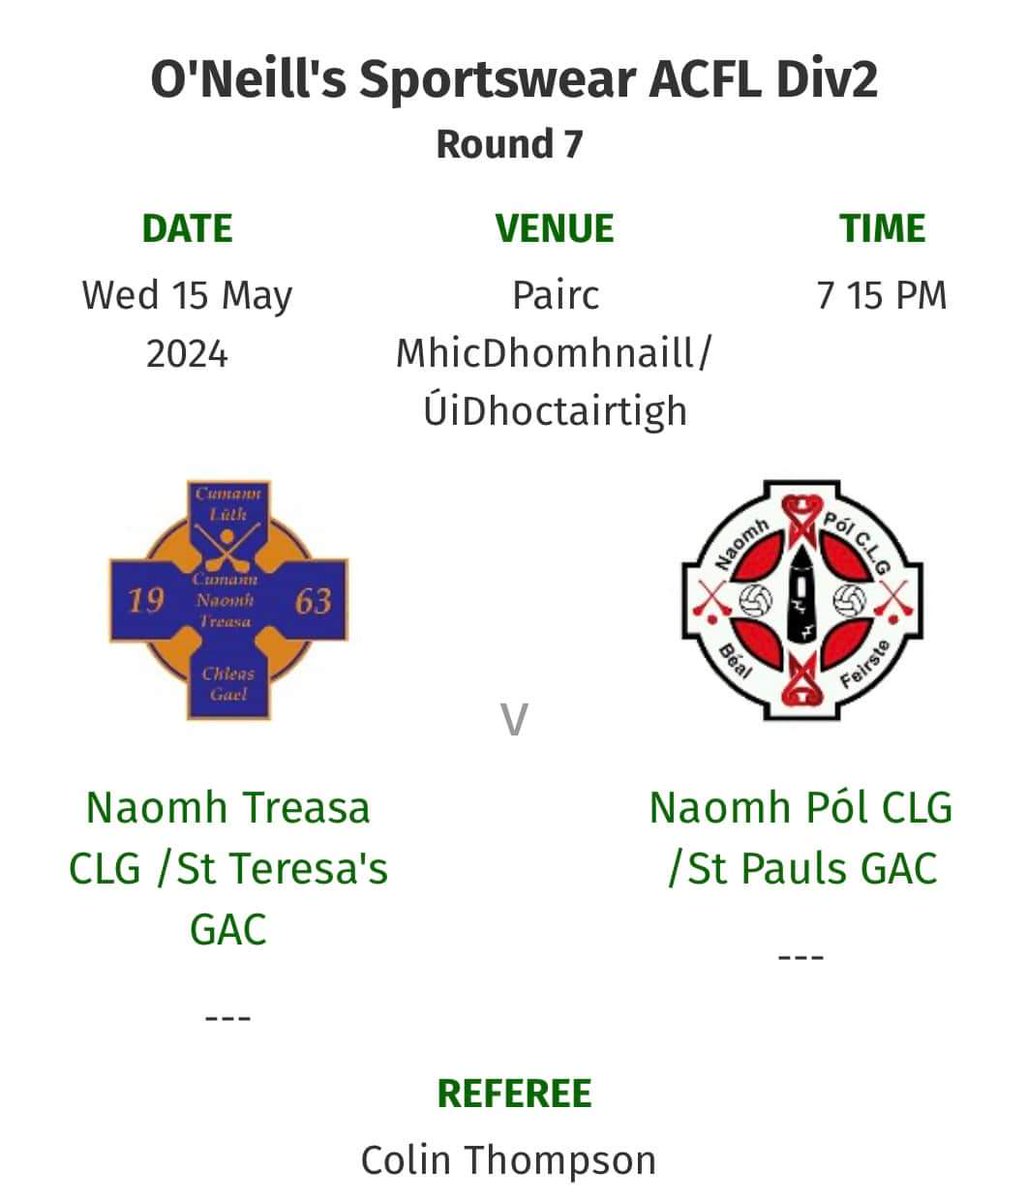 Our Senior Footballers continue their league campaign this evening at home v St Paul's, throw in 7.15pm. All support welcome 💛💙